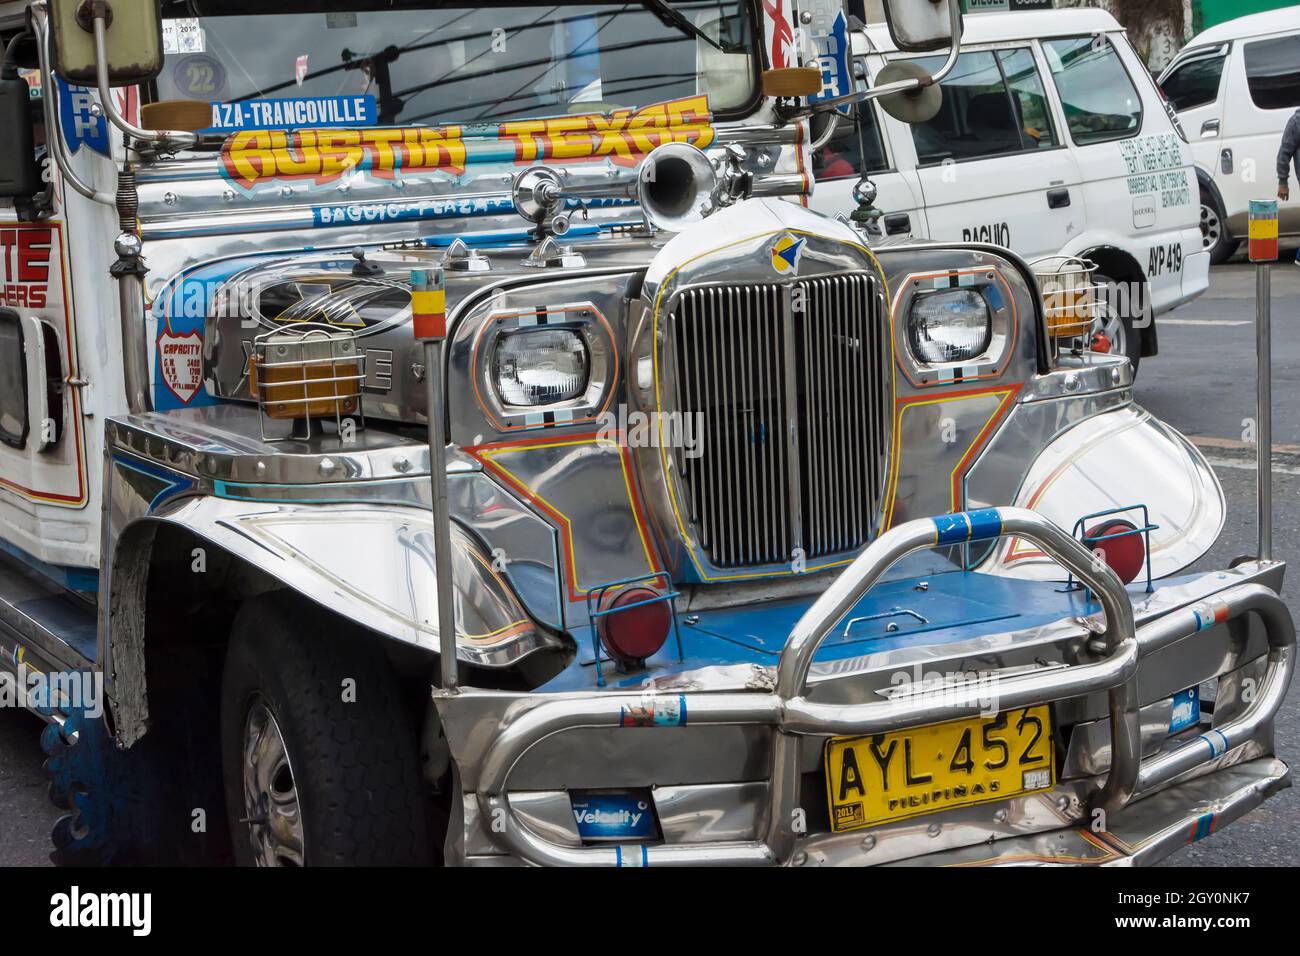 Shini jeepney with a lot of chrome. Baguio, Philippines. Stock Photo